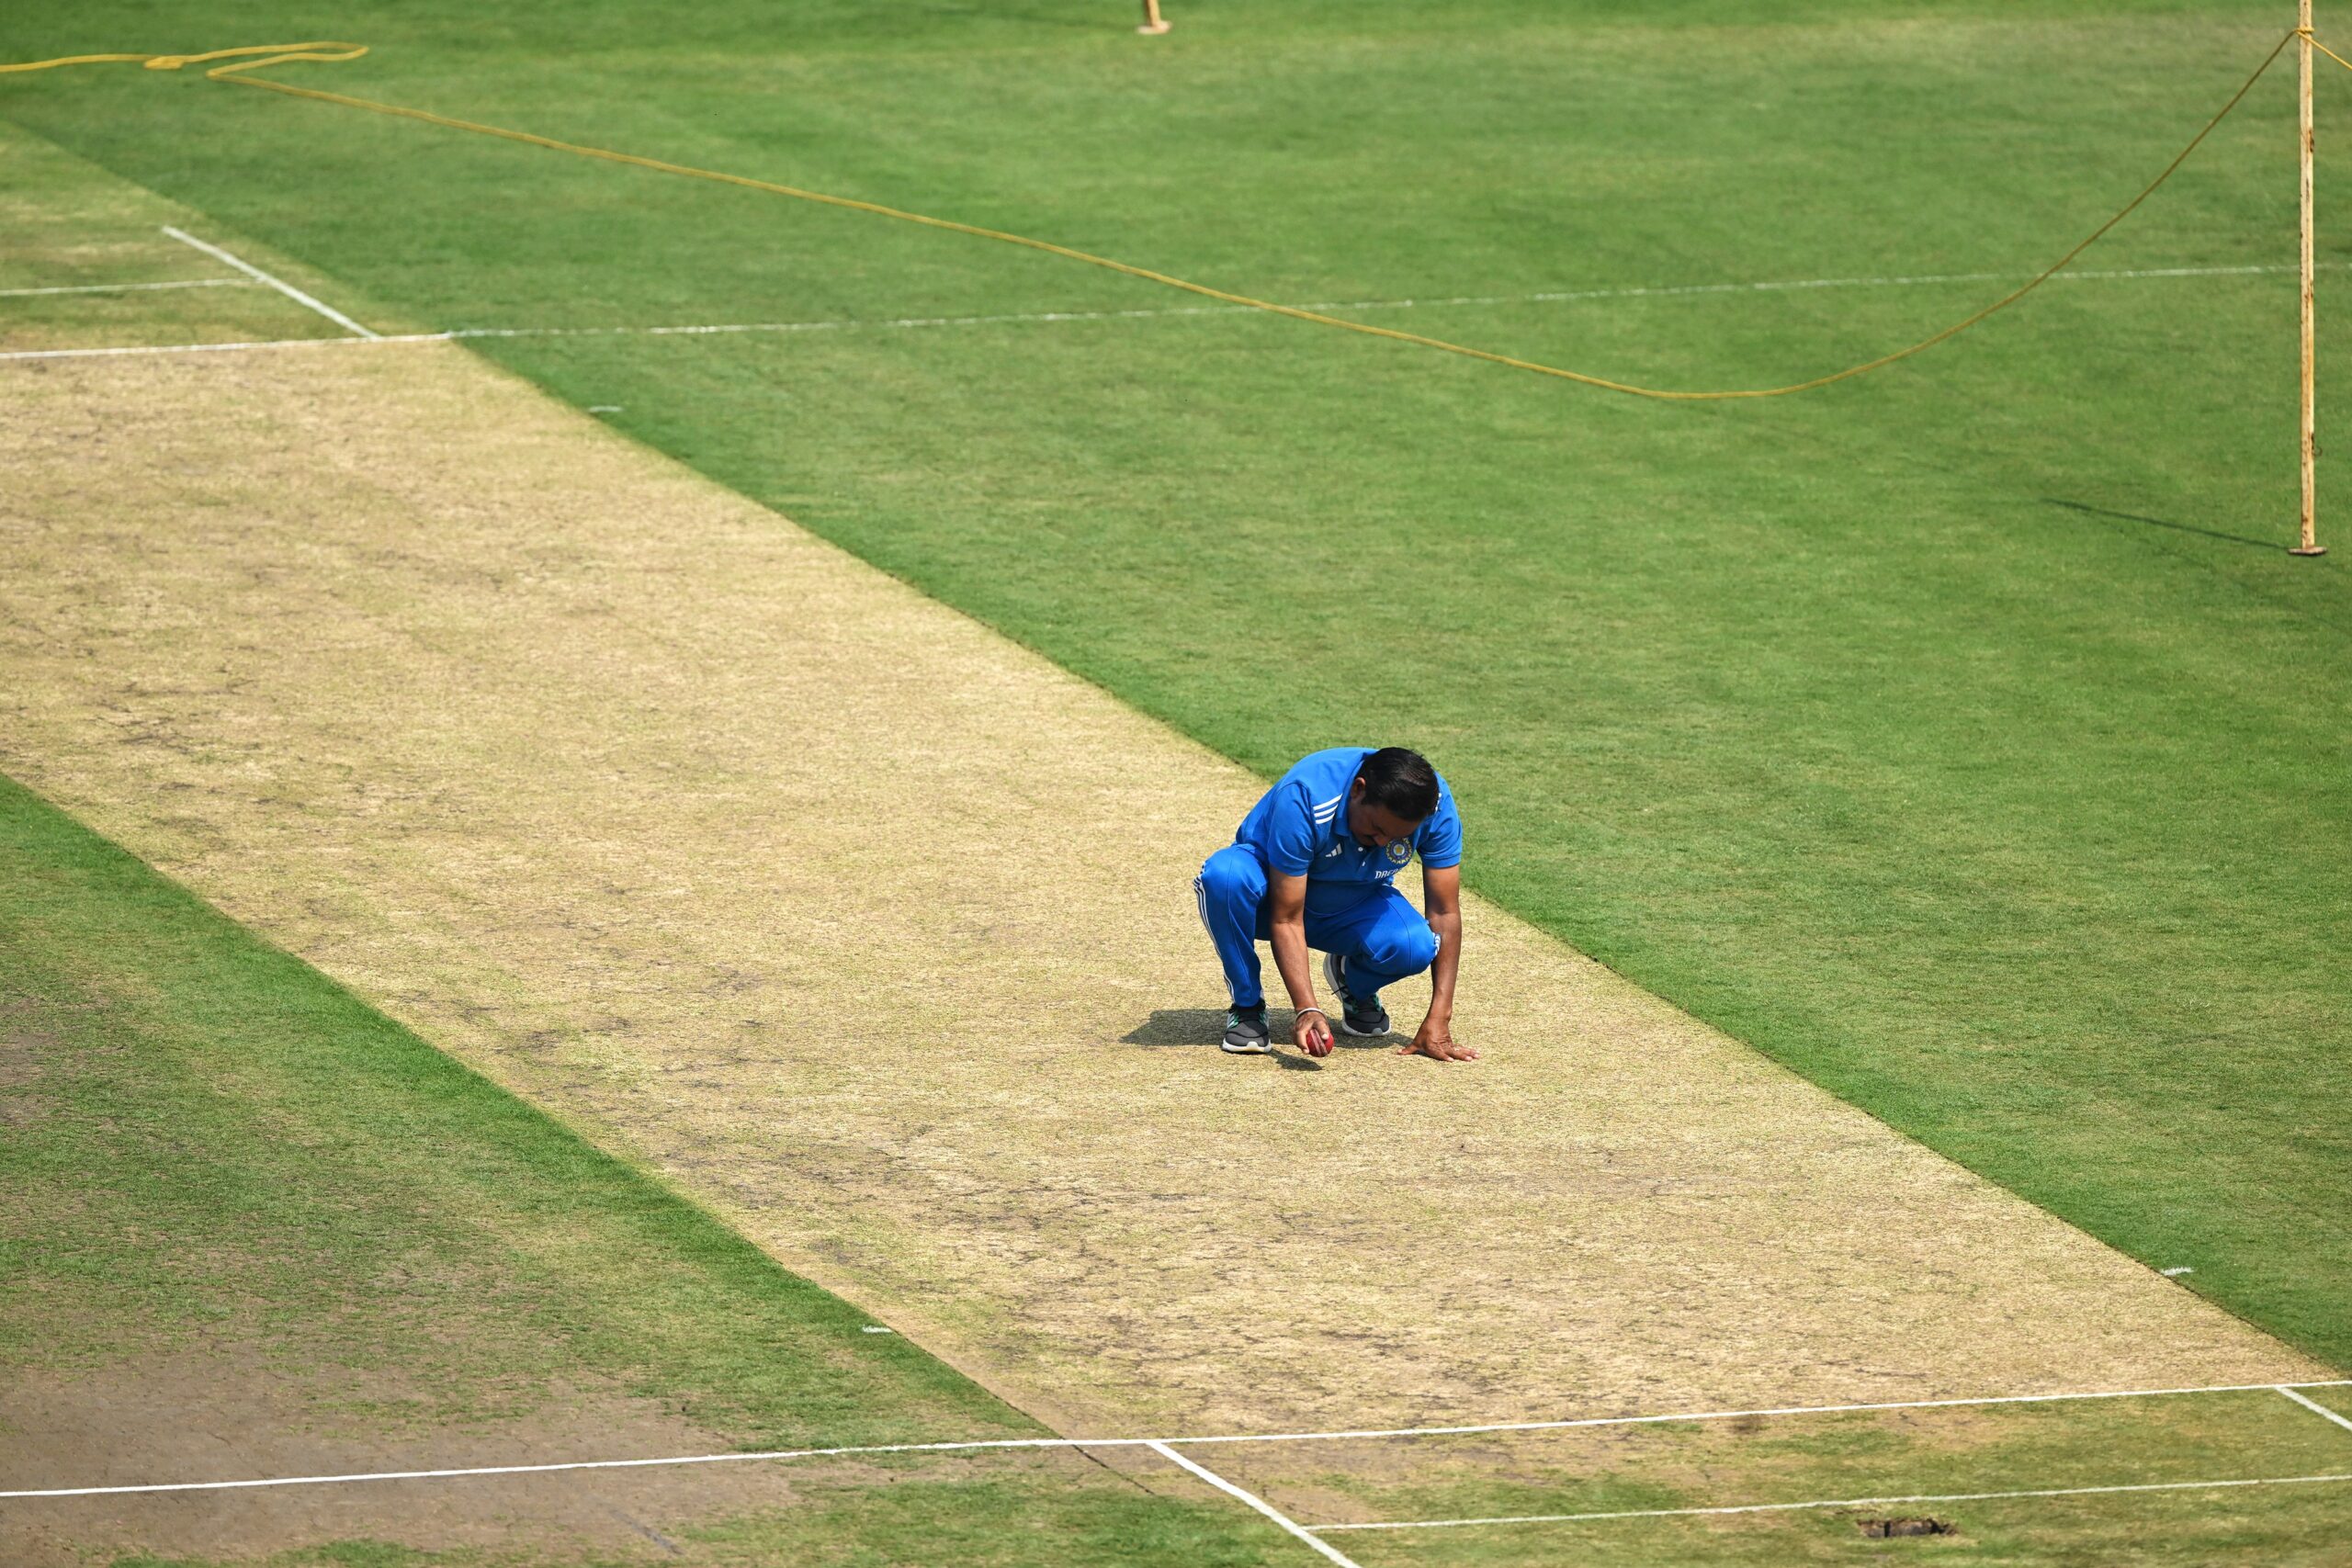 “There Are Cracks”: India Coach’s Honest Review Of Pitch For Ranchi Test